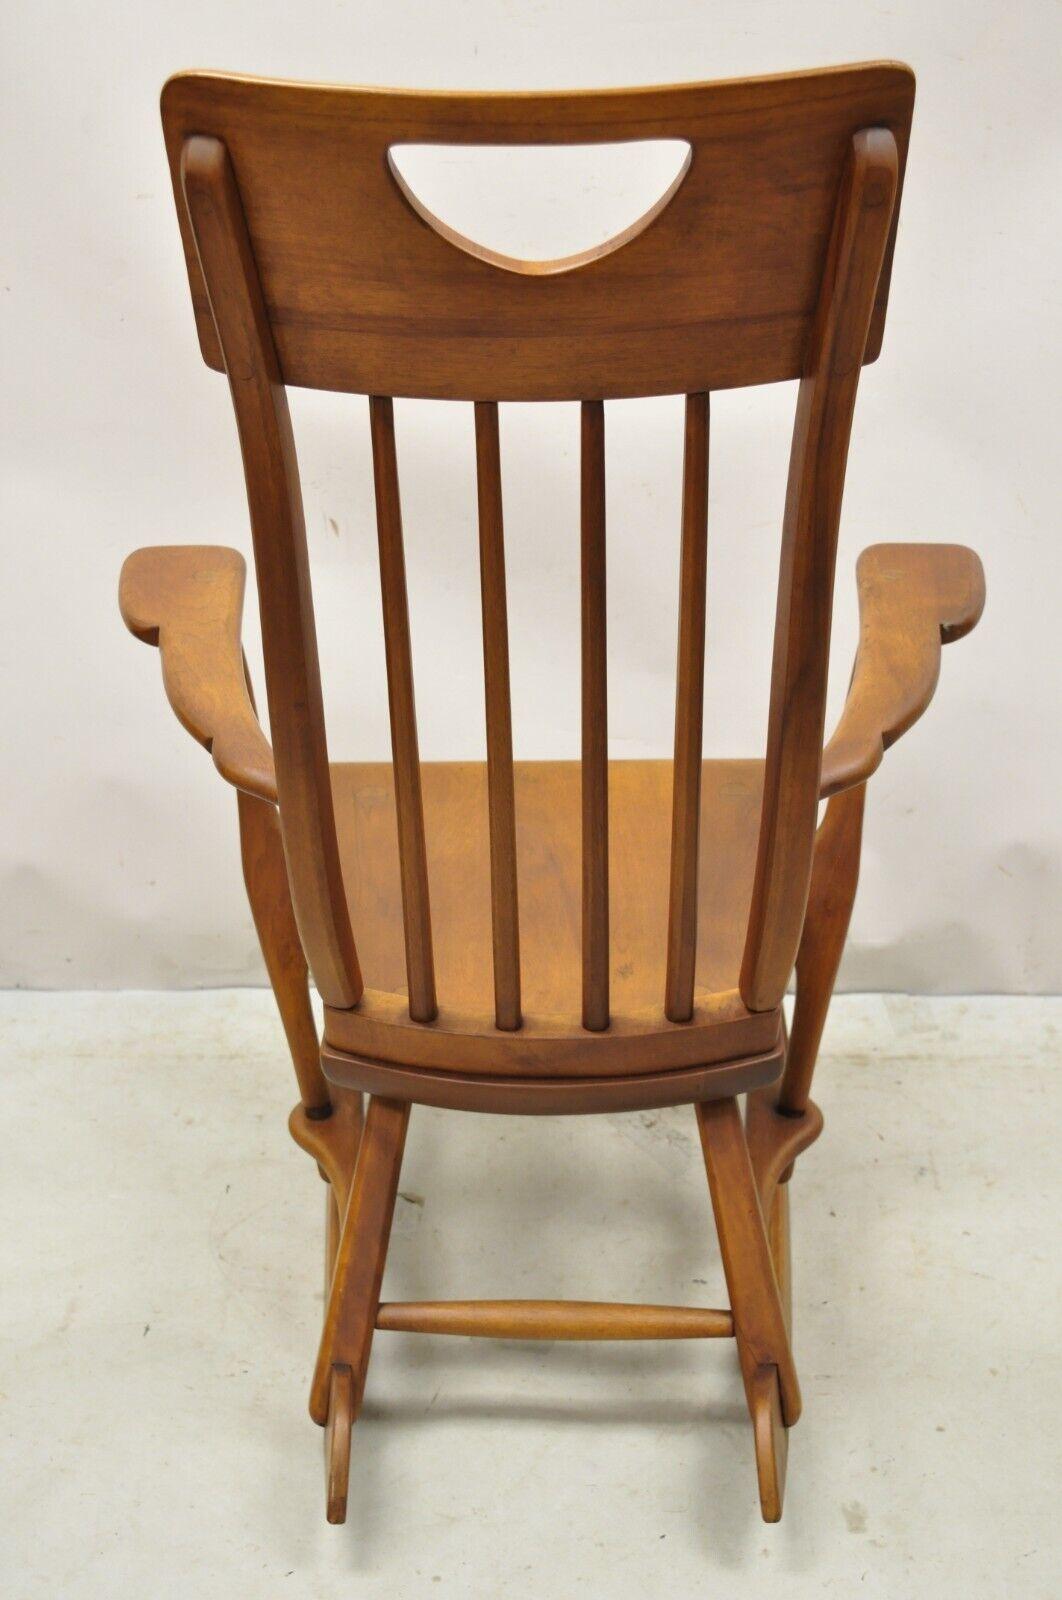 Vintage Sikes Co Maple Wood American Colonial Style Rocker Rocking Chair (A) For Sale 2